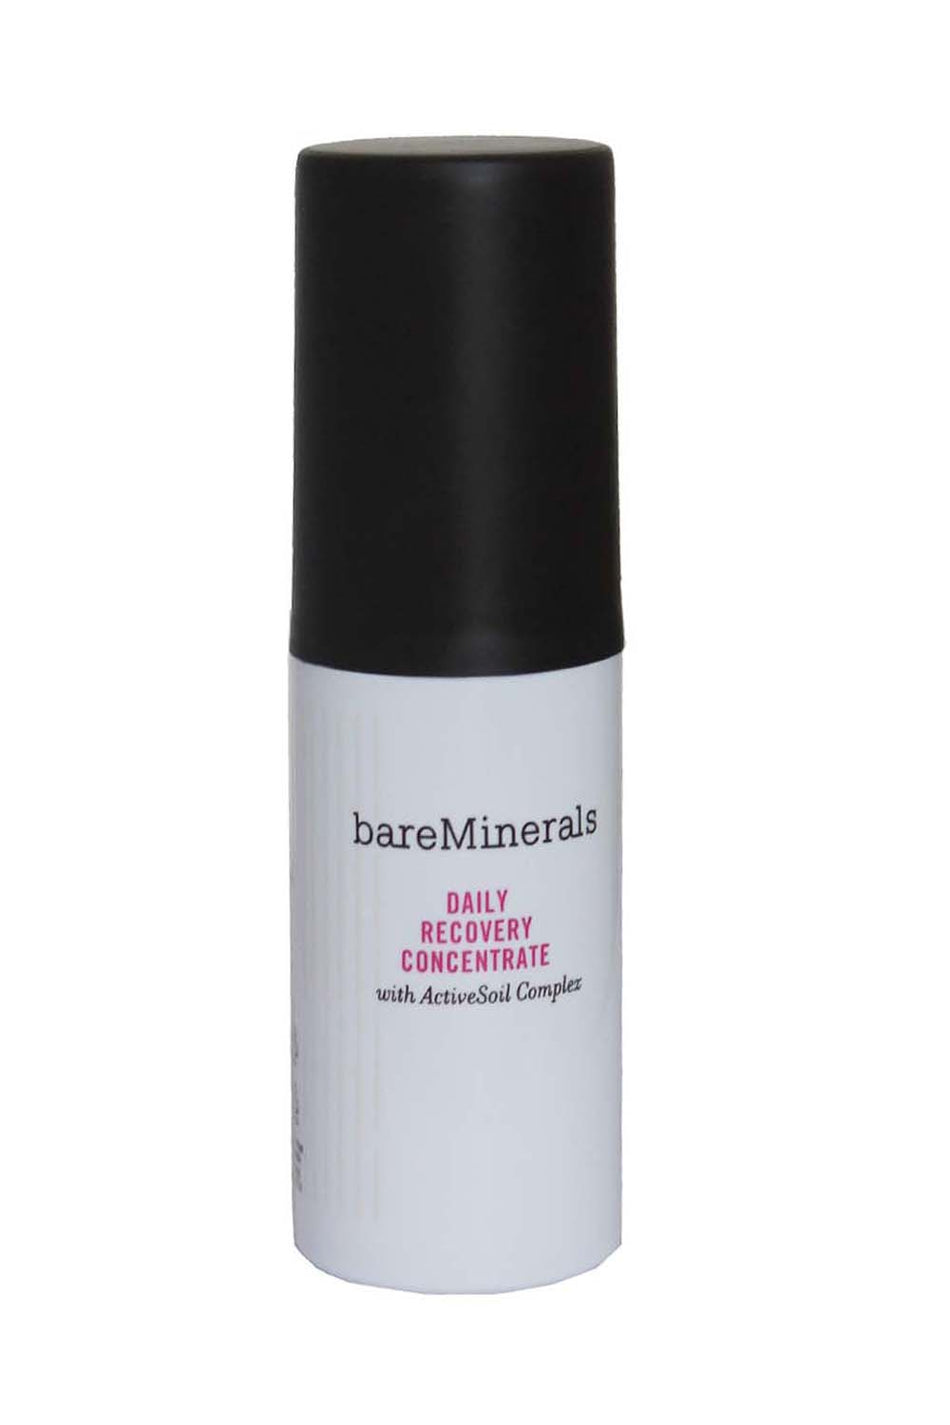 Bareminerals Daily Recovery Concentrate